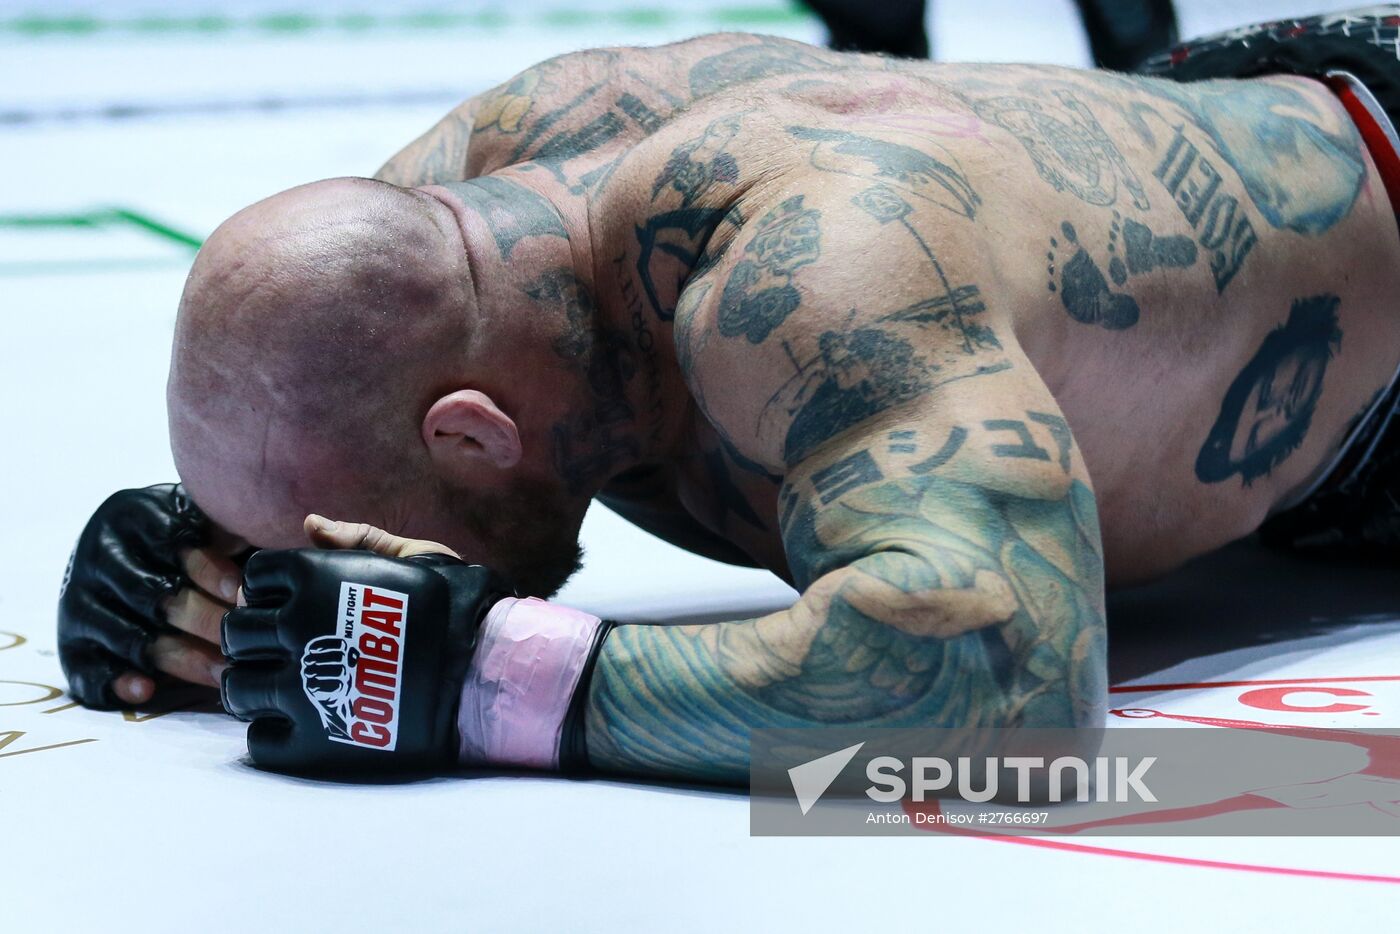 MMA fighter Jeff Monson's first fight under Russian flag